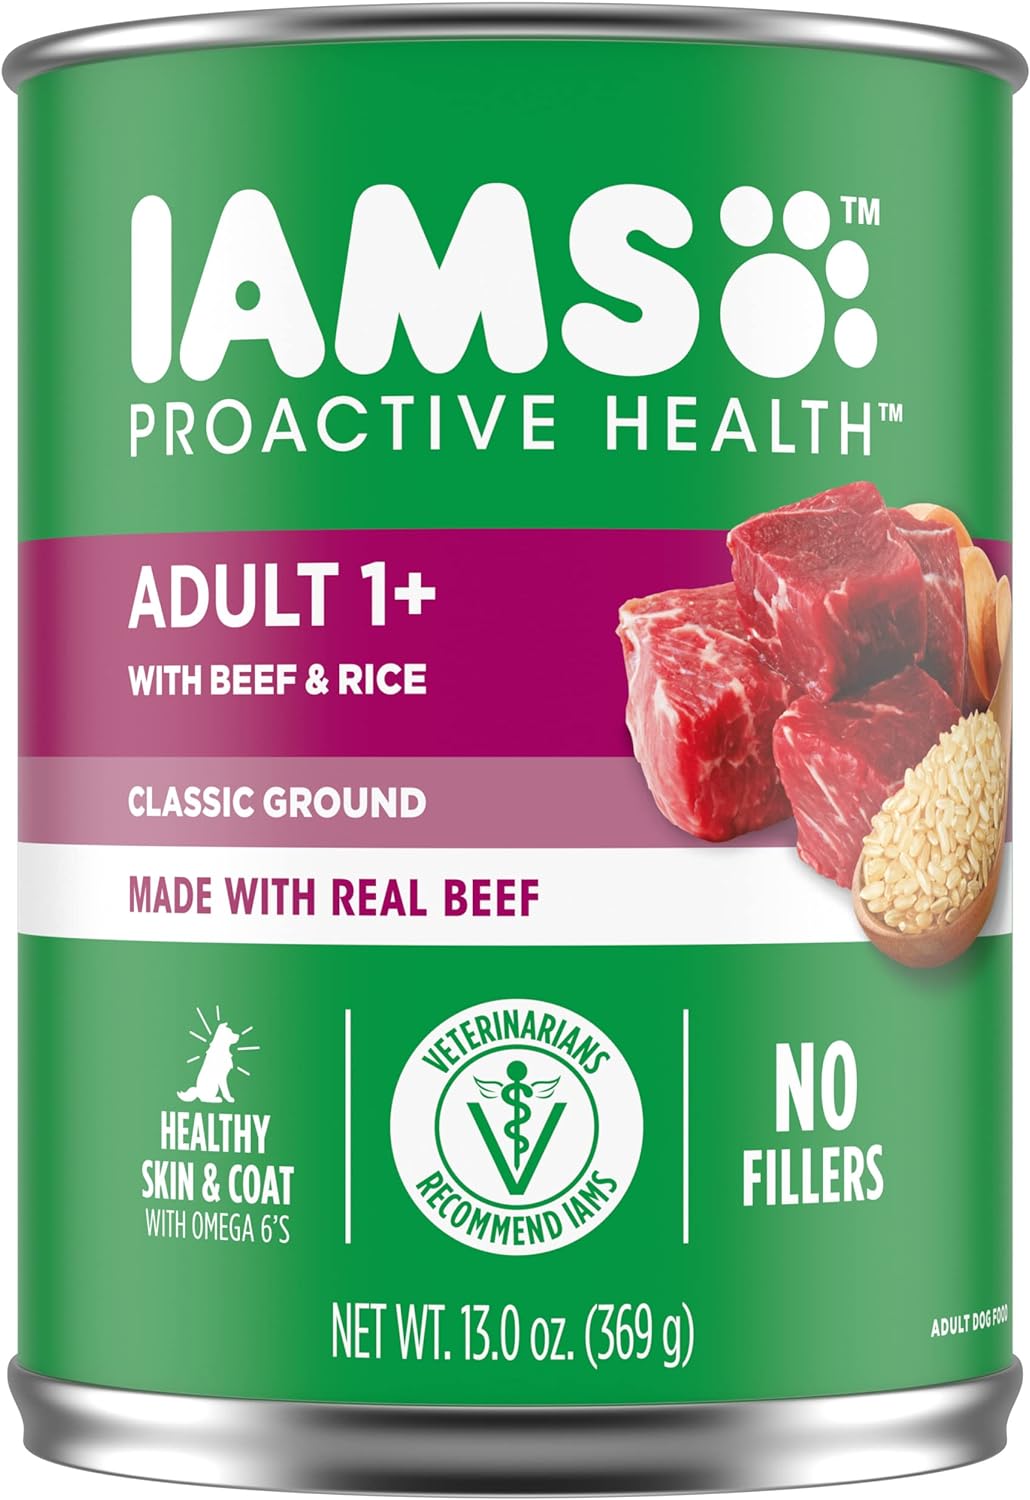 IAMS PROACTIVE HEALTH Adult Wet Dog Food Classic Ground with Beef and Whole Grain Rice, 12-Pack of 13 oz. Cans